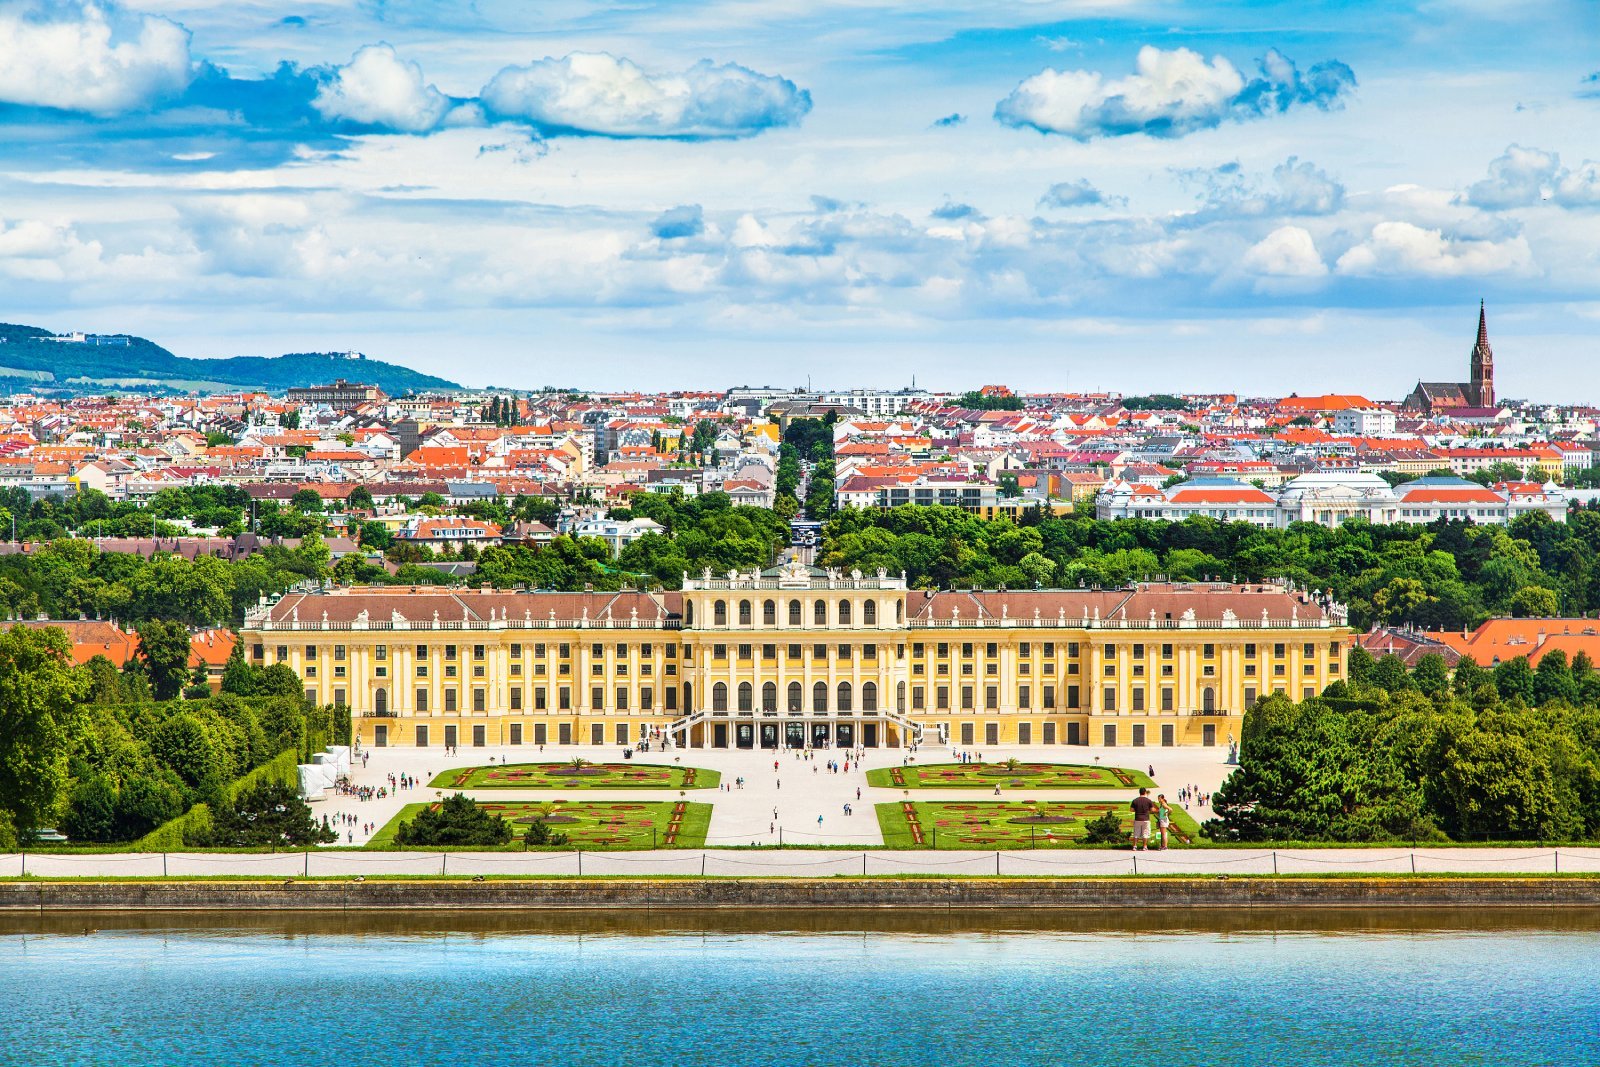 <p class="wp-caption-text">Image Credit: Shutterstock / canadastock</p>  <p><span>A masterpiece of Baroque architecture, Schönbrunn Palace enchants with its 1,441 rooms, sprawling gardens, and a Gloriette offering panoramic vistas of Vienna.</span></p>